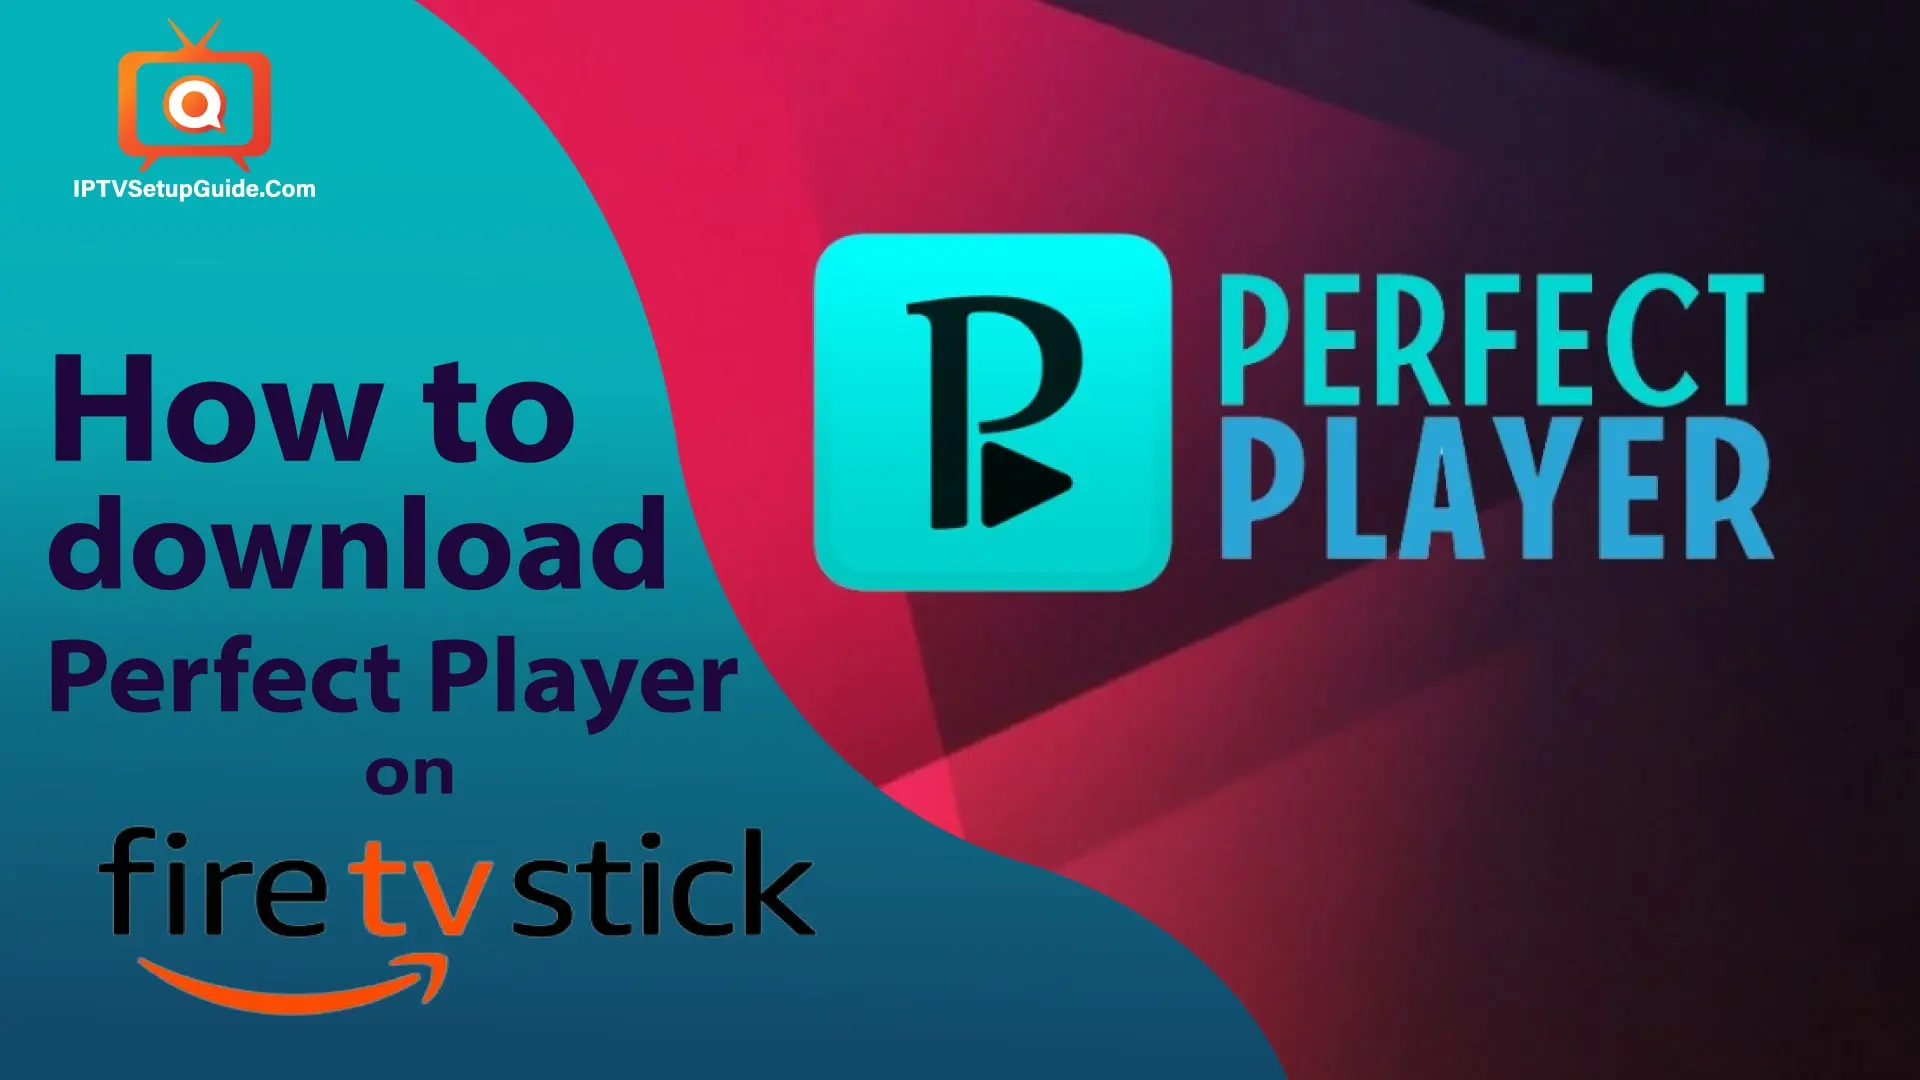 Left side of the image "How to download Perfect Player on Firestick"